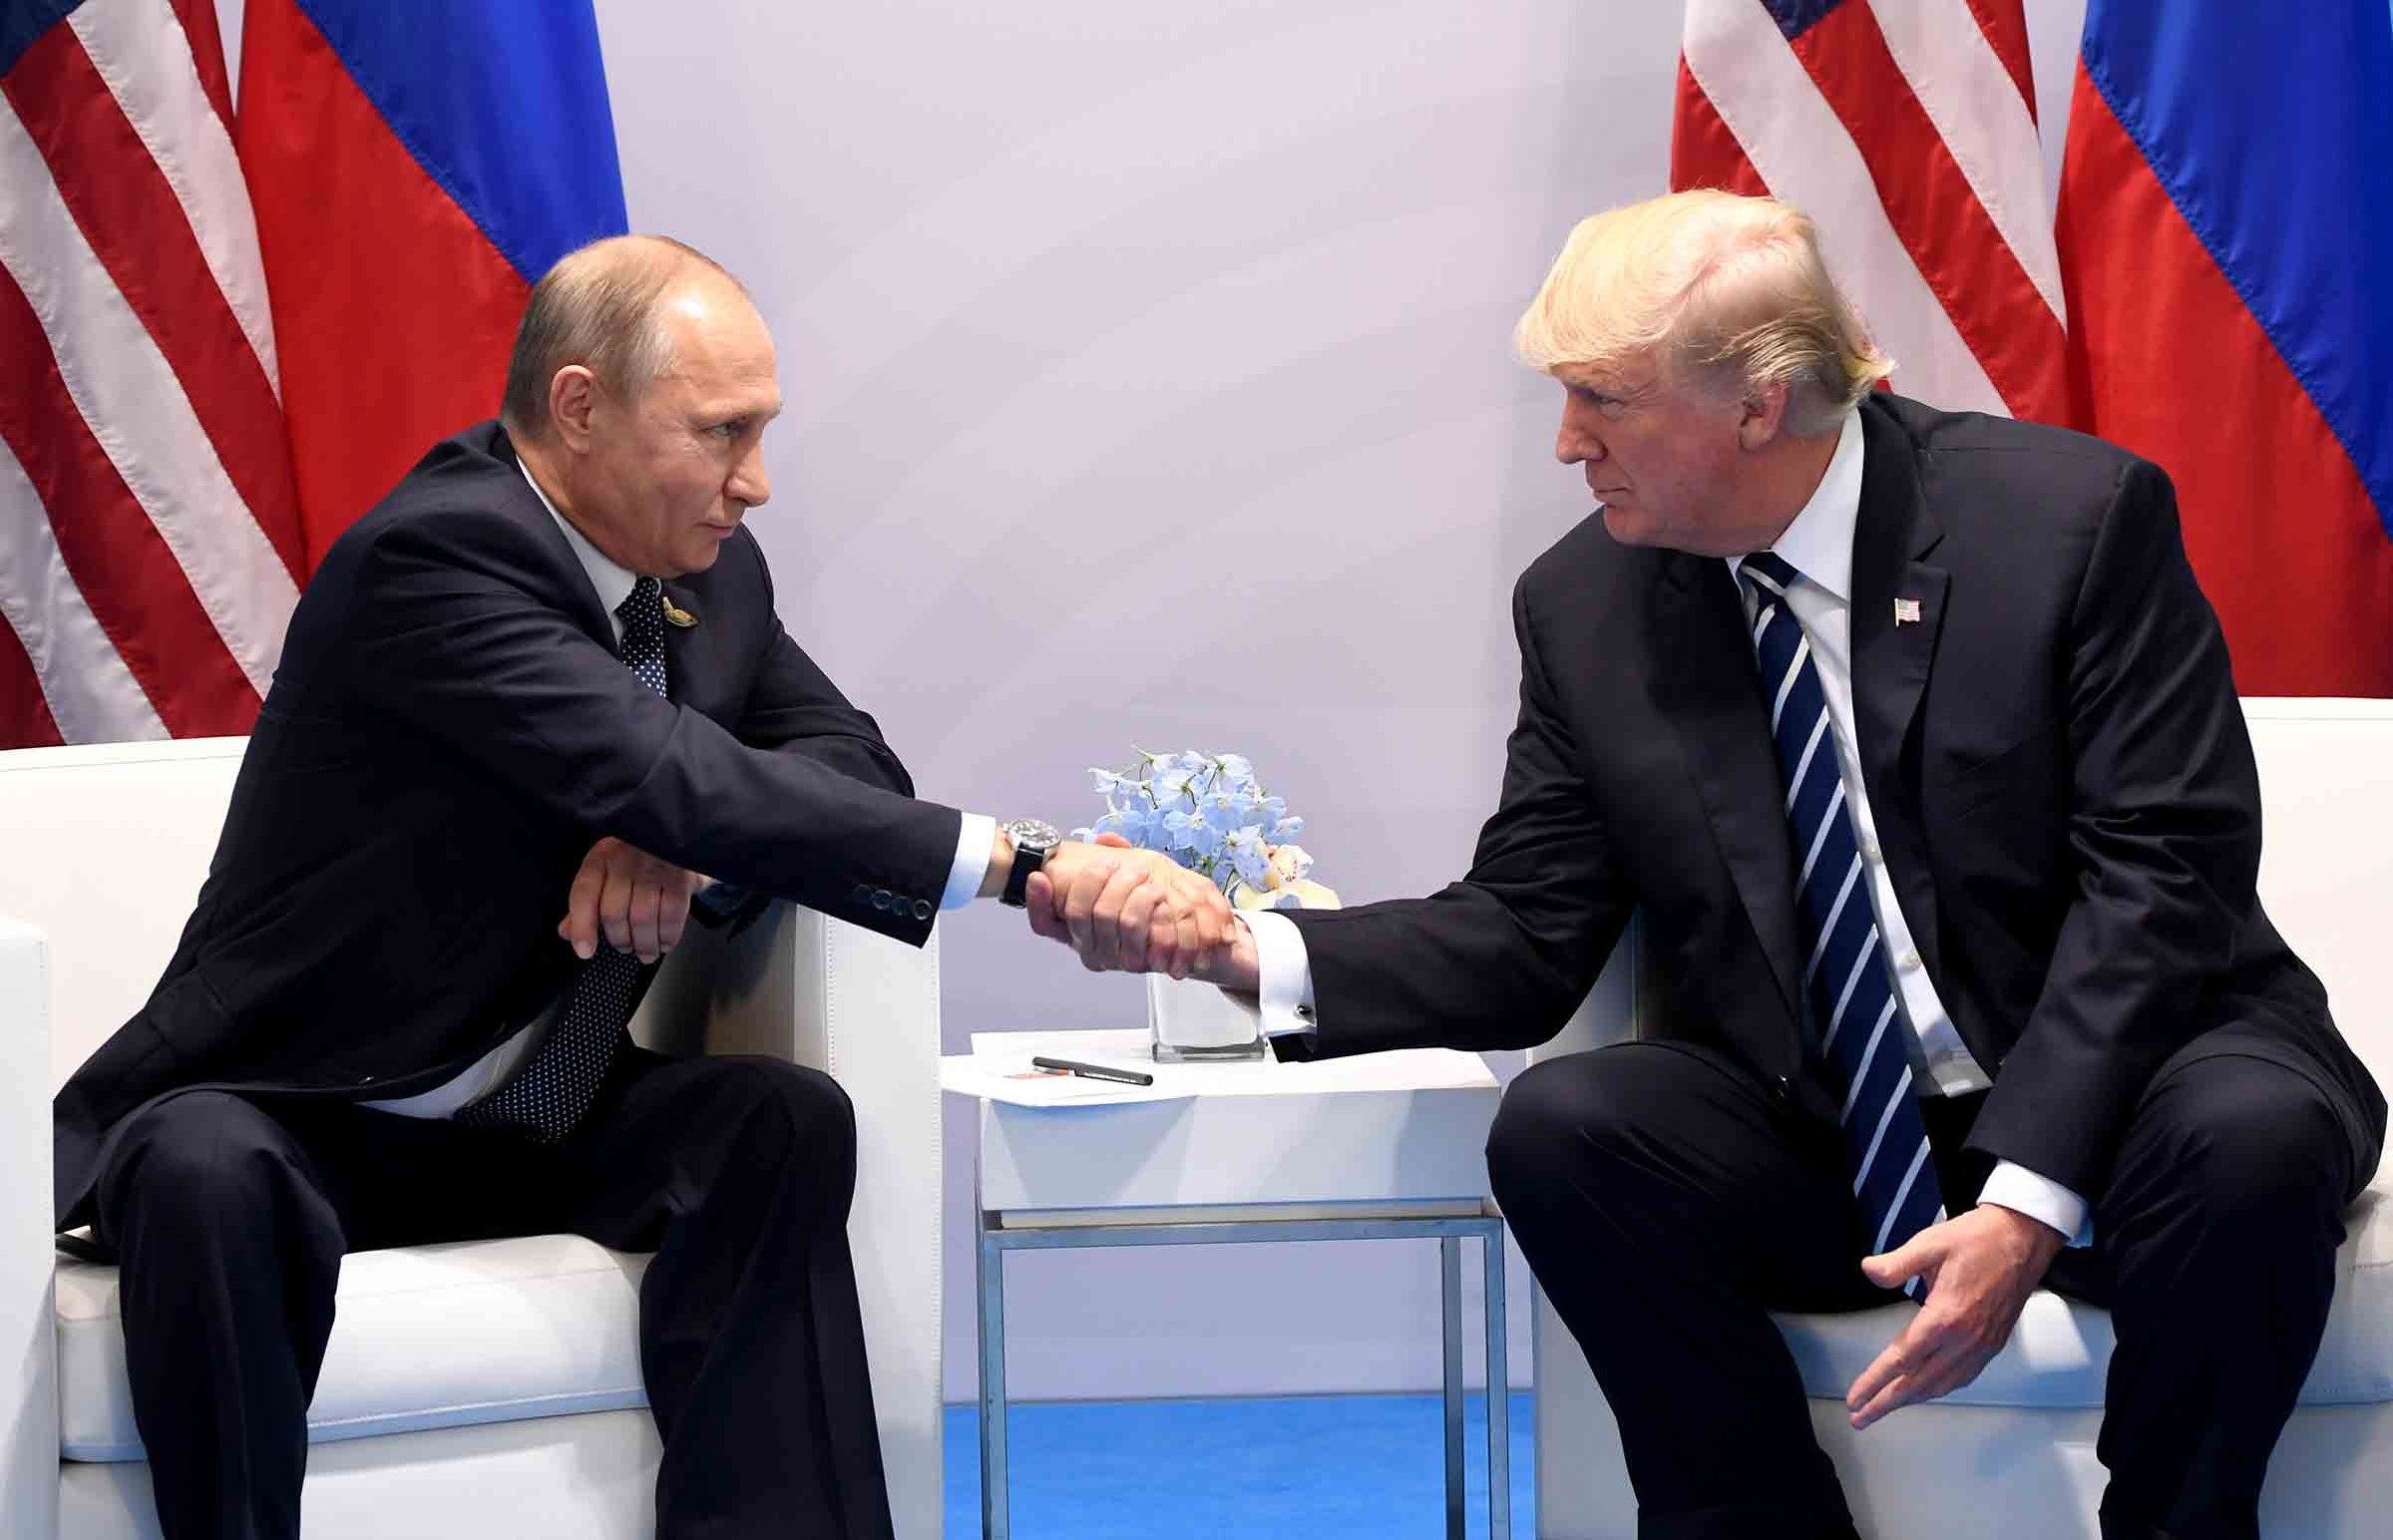 President Donald Trump and Russia's President Vladimir Putin shake hands during a meeting on the sidelines of the G20 Summit in Hamburg, Germany, on July 7, 2017.